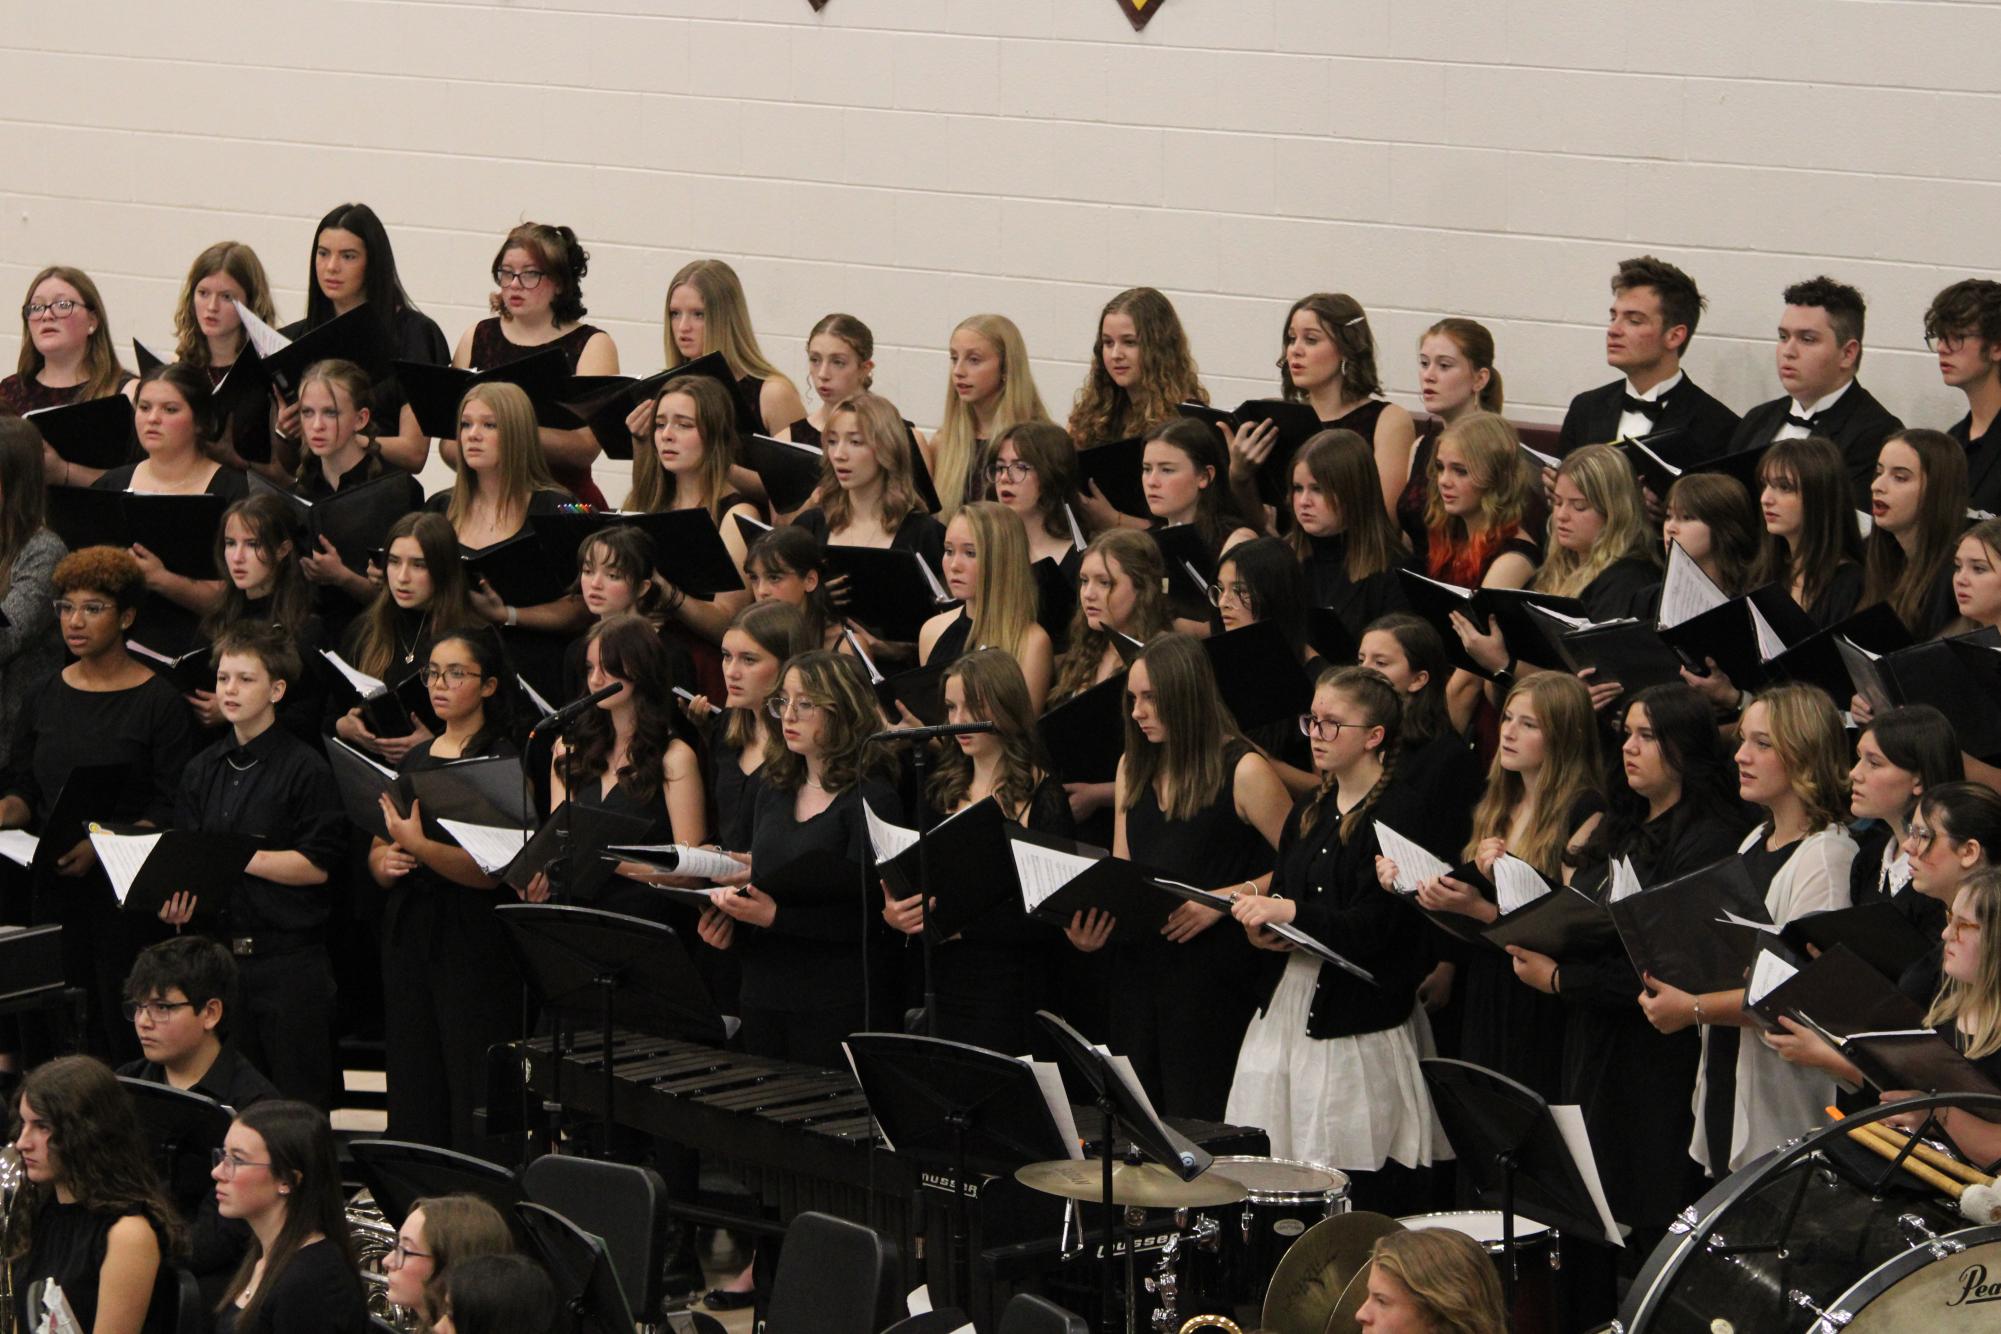 Choir performers stand on the risers, holding black binders of music during the assembly. The songs they sang included In Flanders Fields, Star Spangled Banner and the Armed Forces Medley.